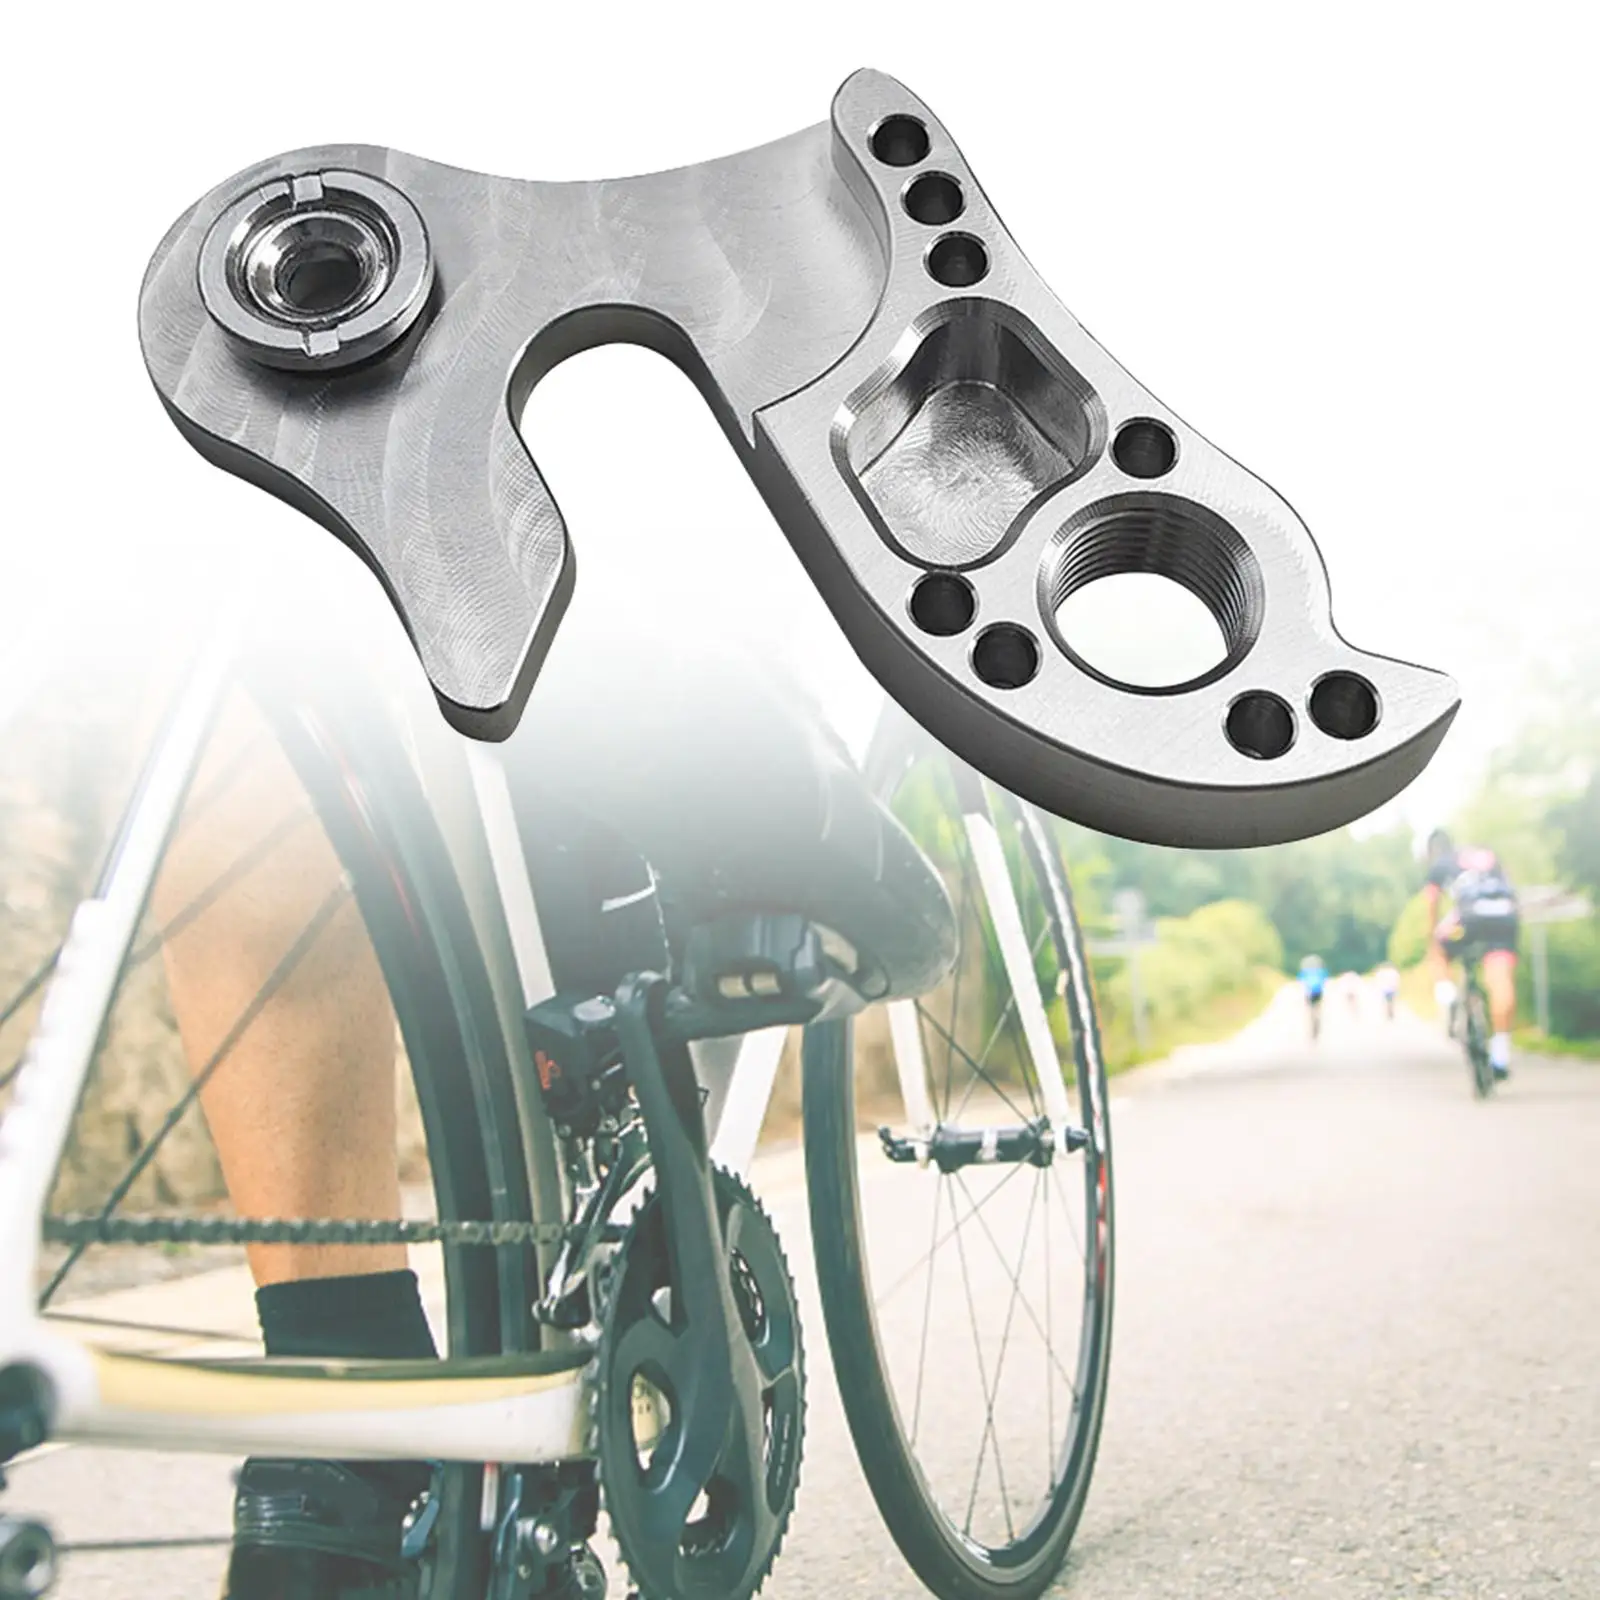 Universal Derailleur Hanger Stainless Steel Adapter Transmission hook Silver Parts for Racing Bike Replace MTB Road Bike